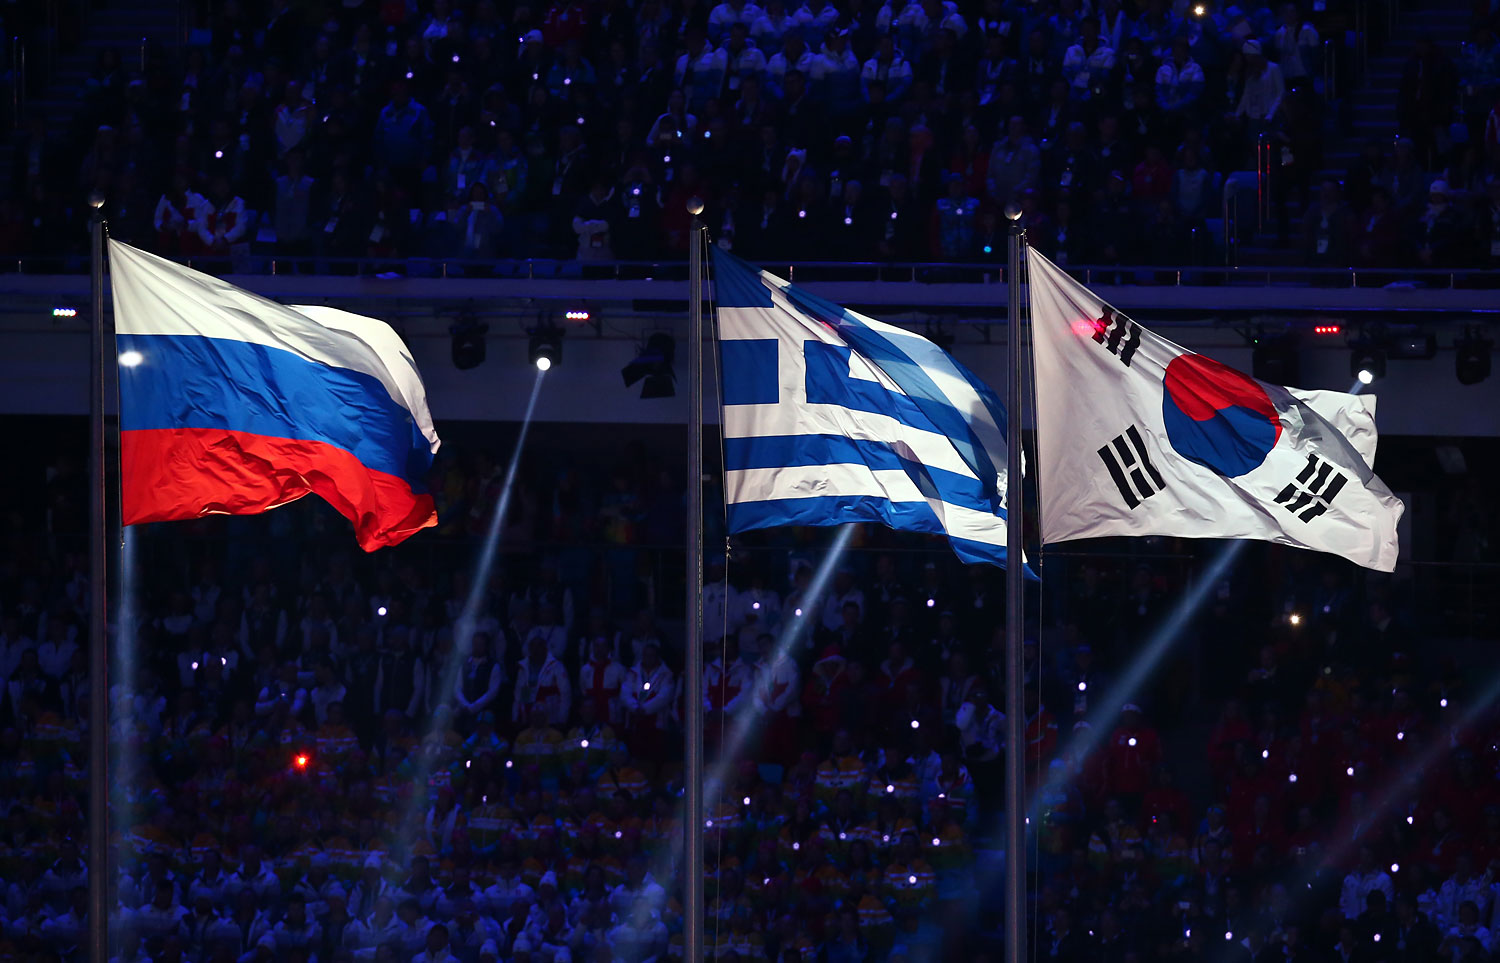 The Flags of Russia, Greece and South Korea are raised.